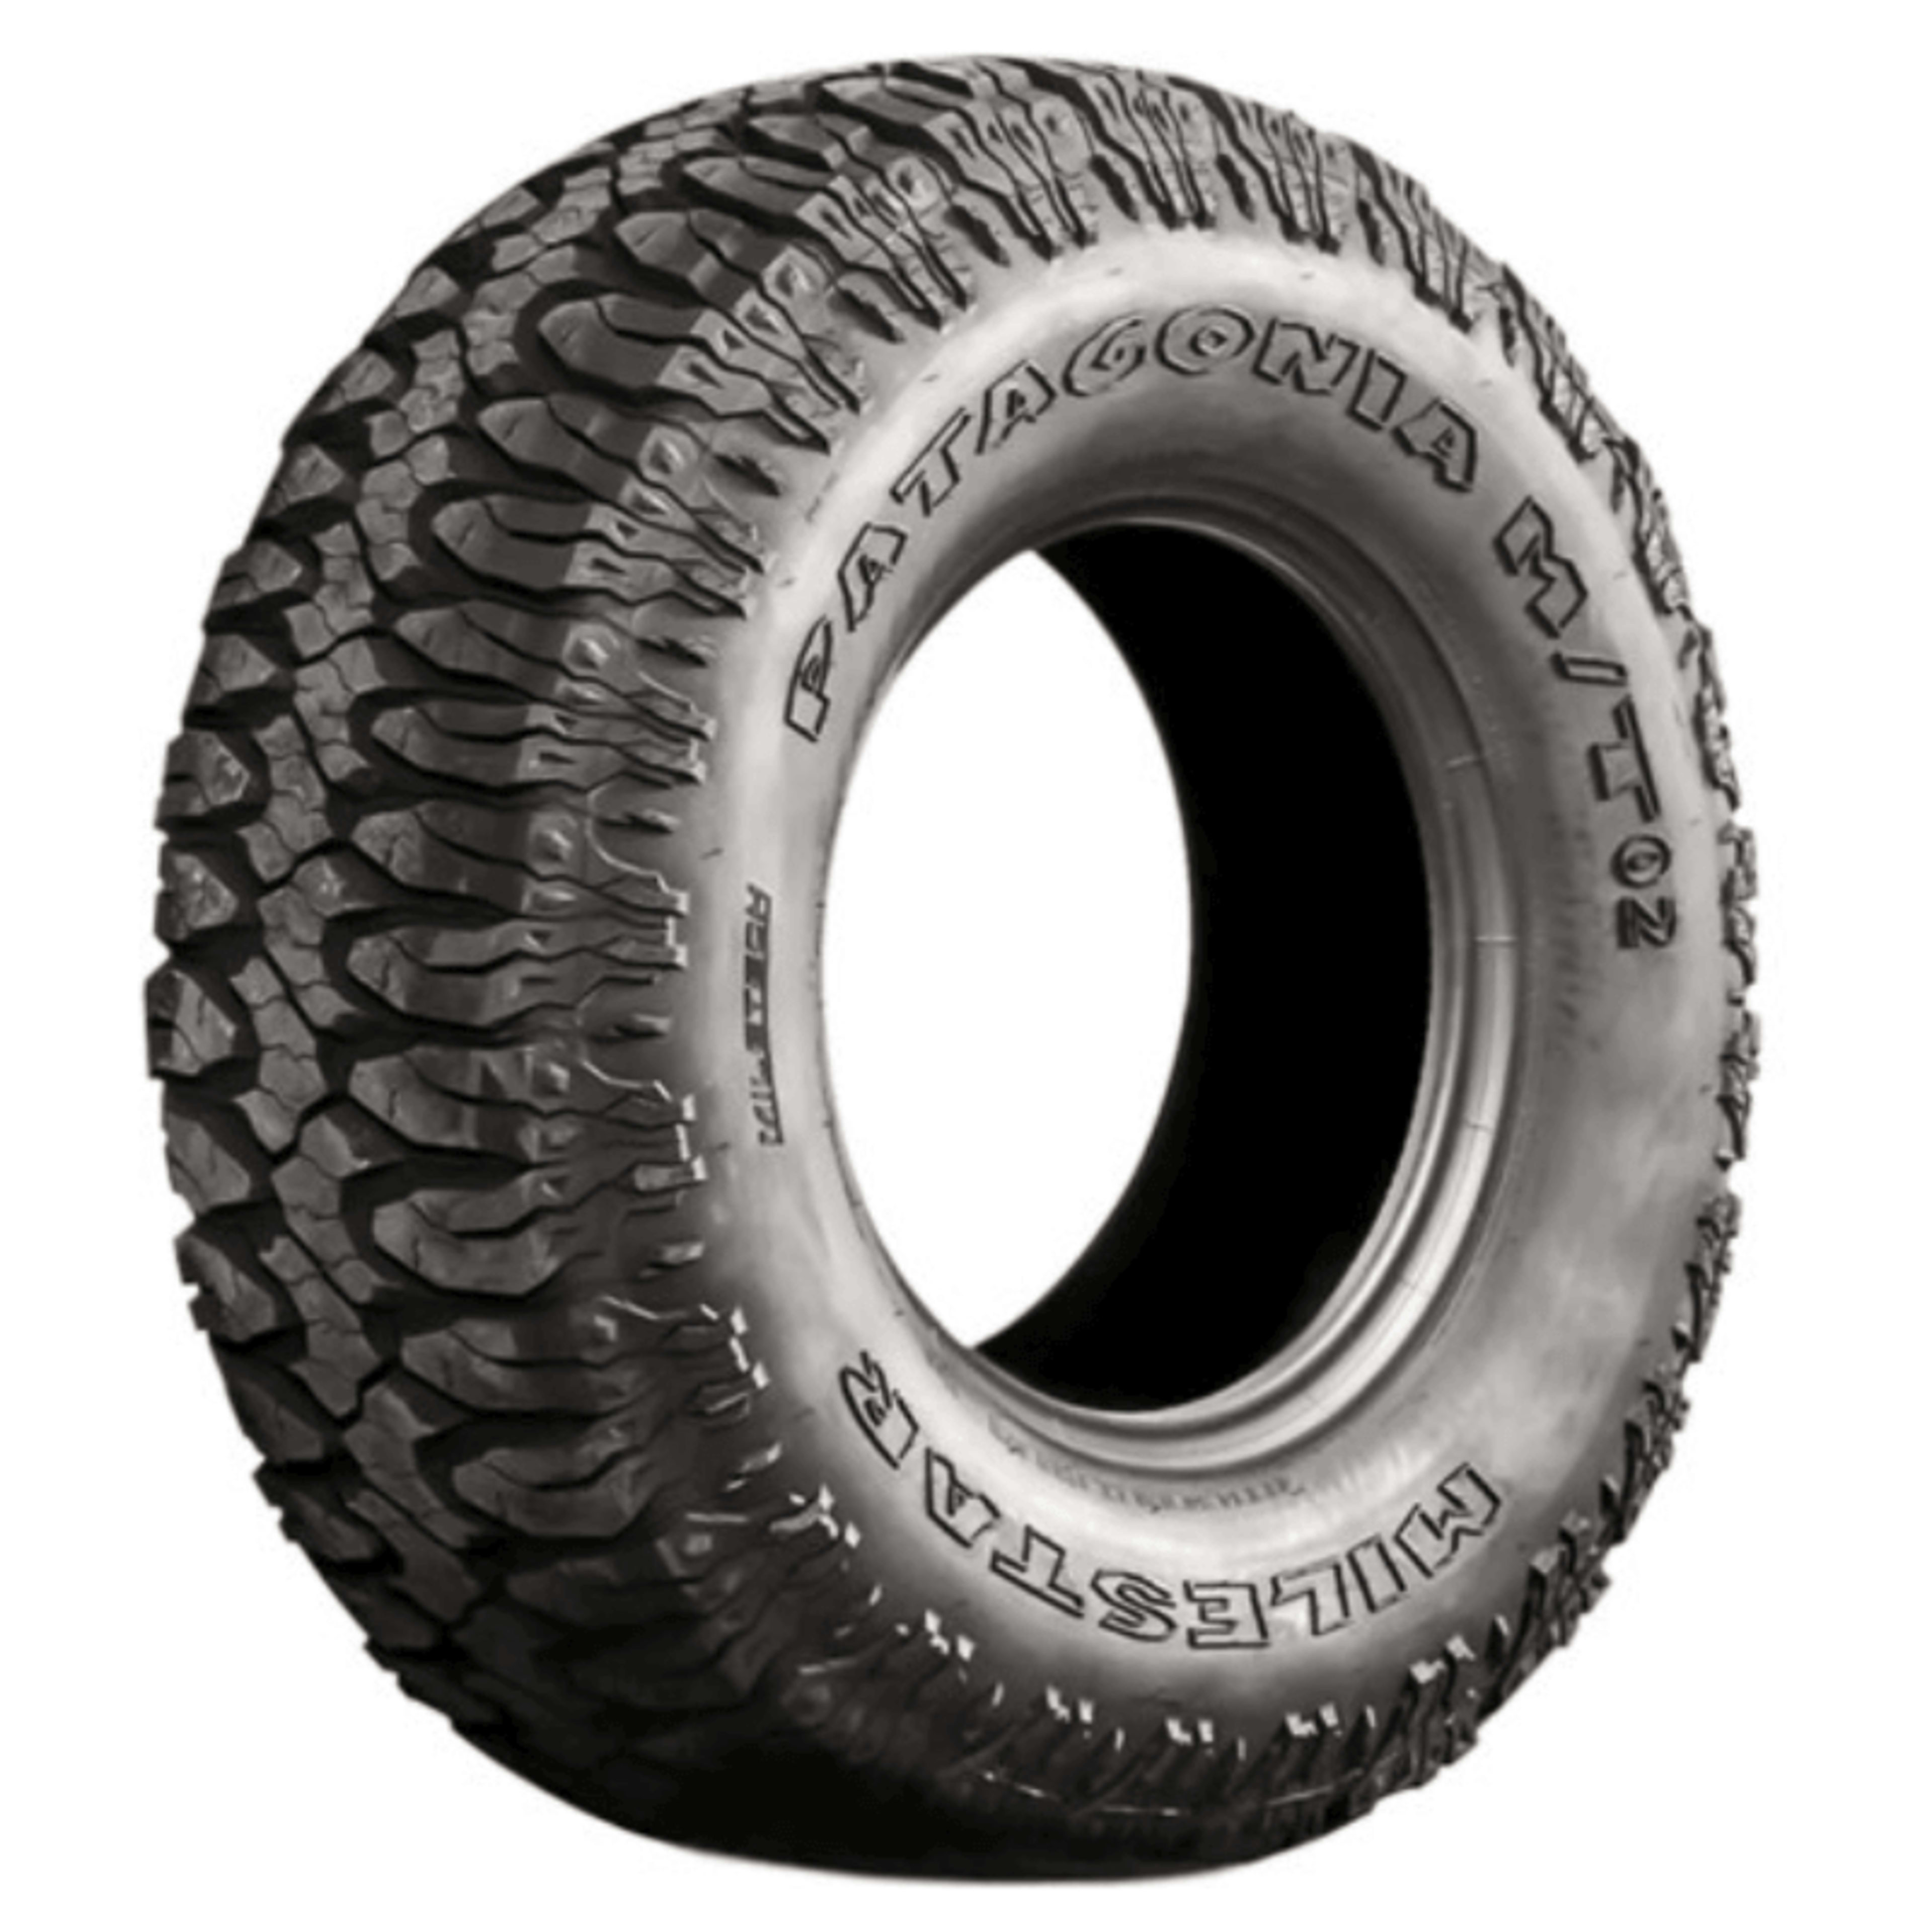 Shop for 315/75R16 Tires for Your Vehicle | SimpleTire